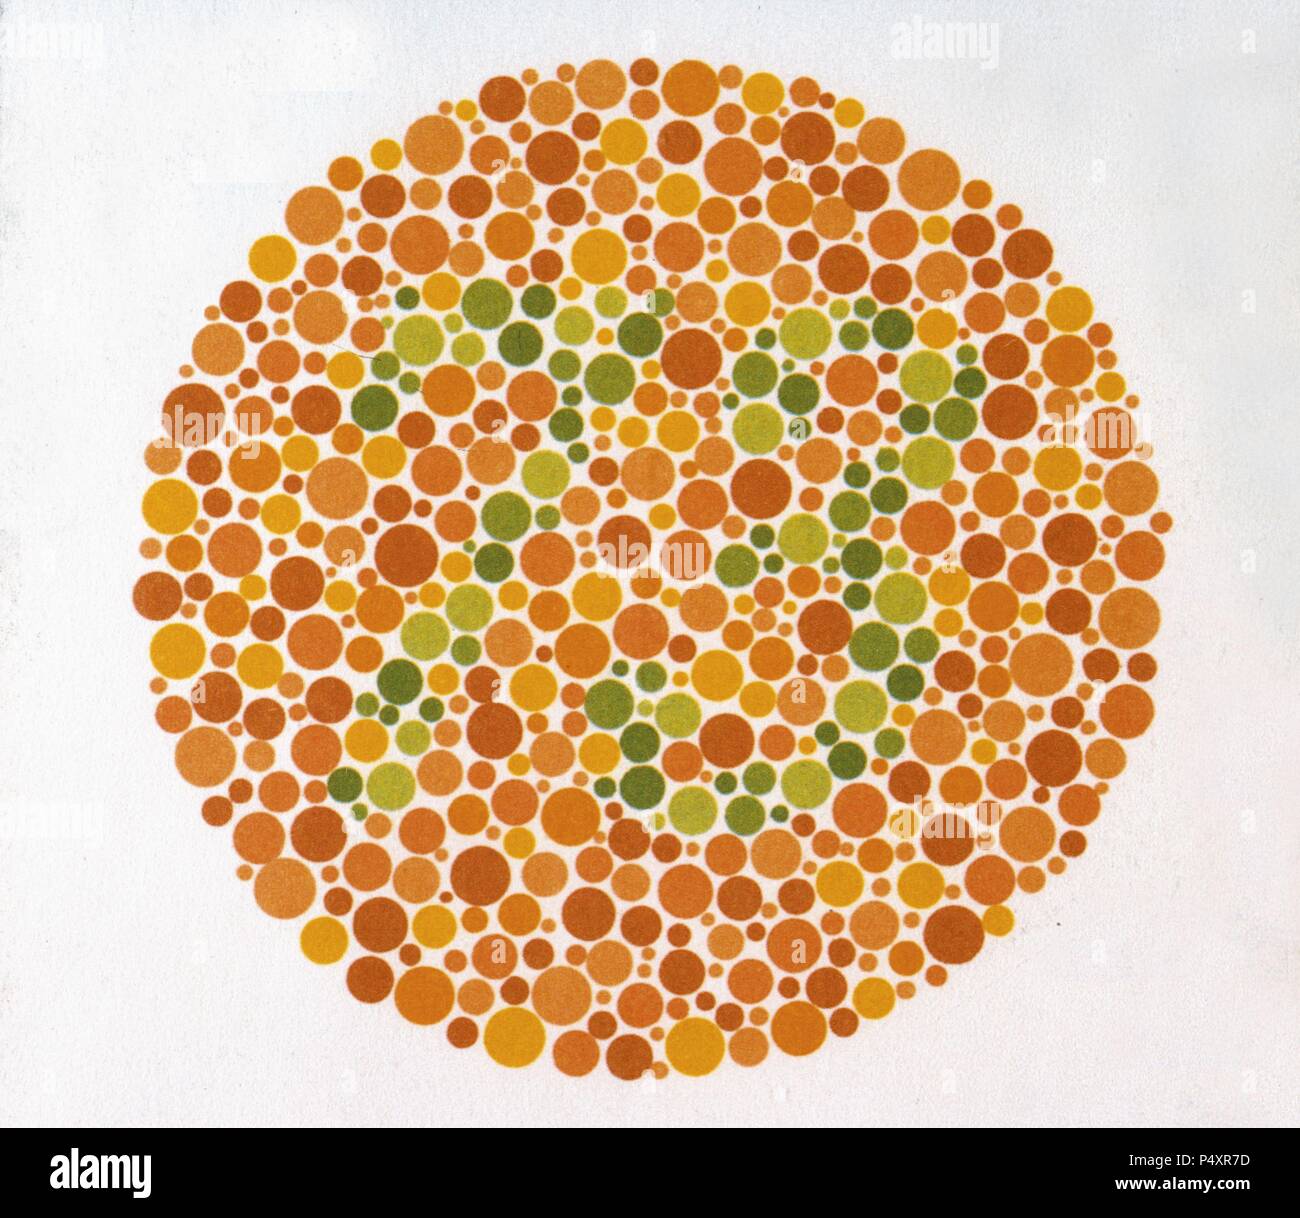 the-ishihara-color-test-color-perception-test-for-red-green-color-deficiencies-ishihara-plate